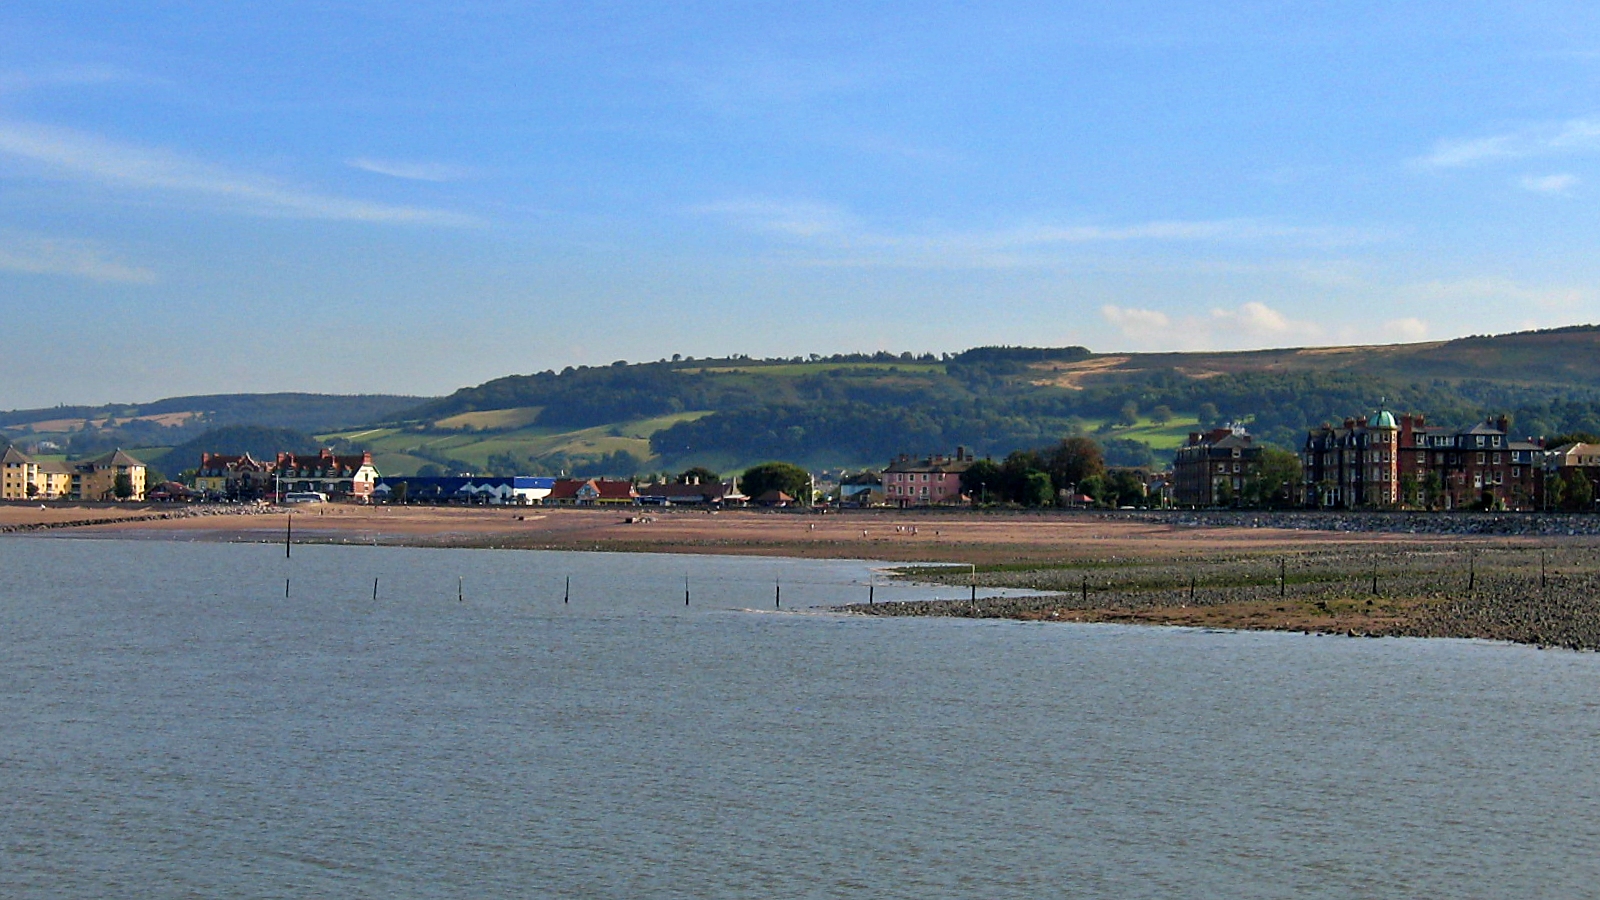 The Seafront at Minehead